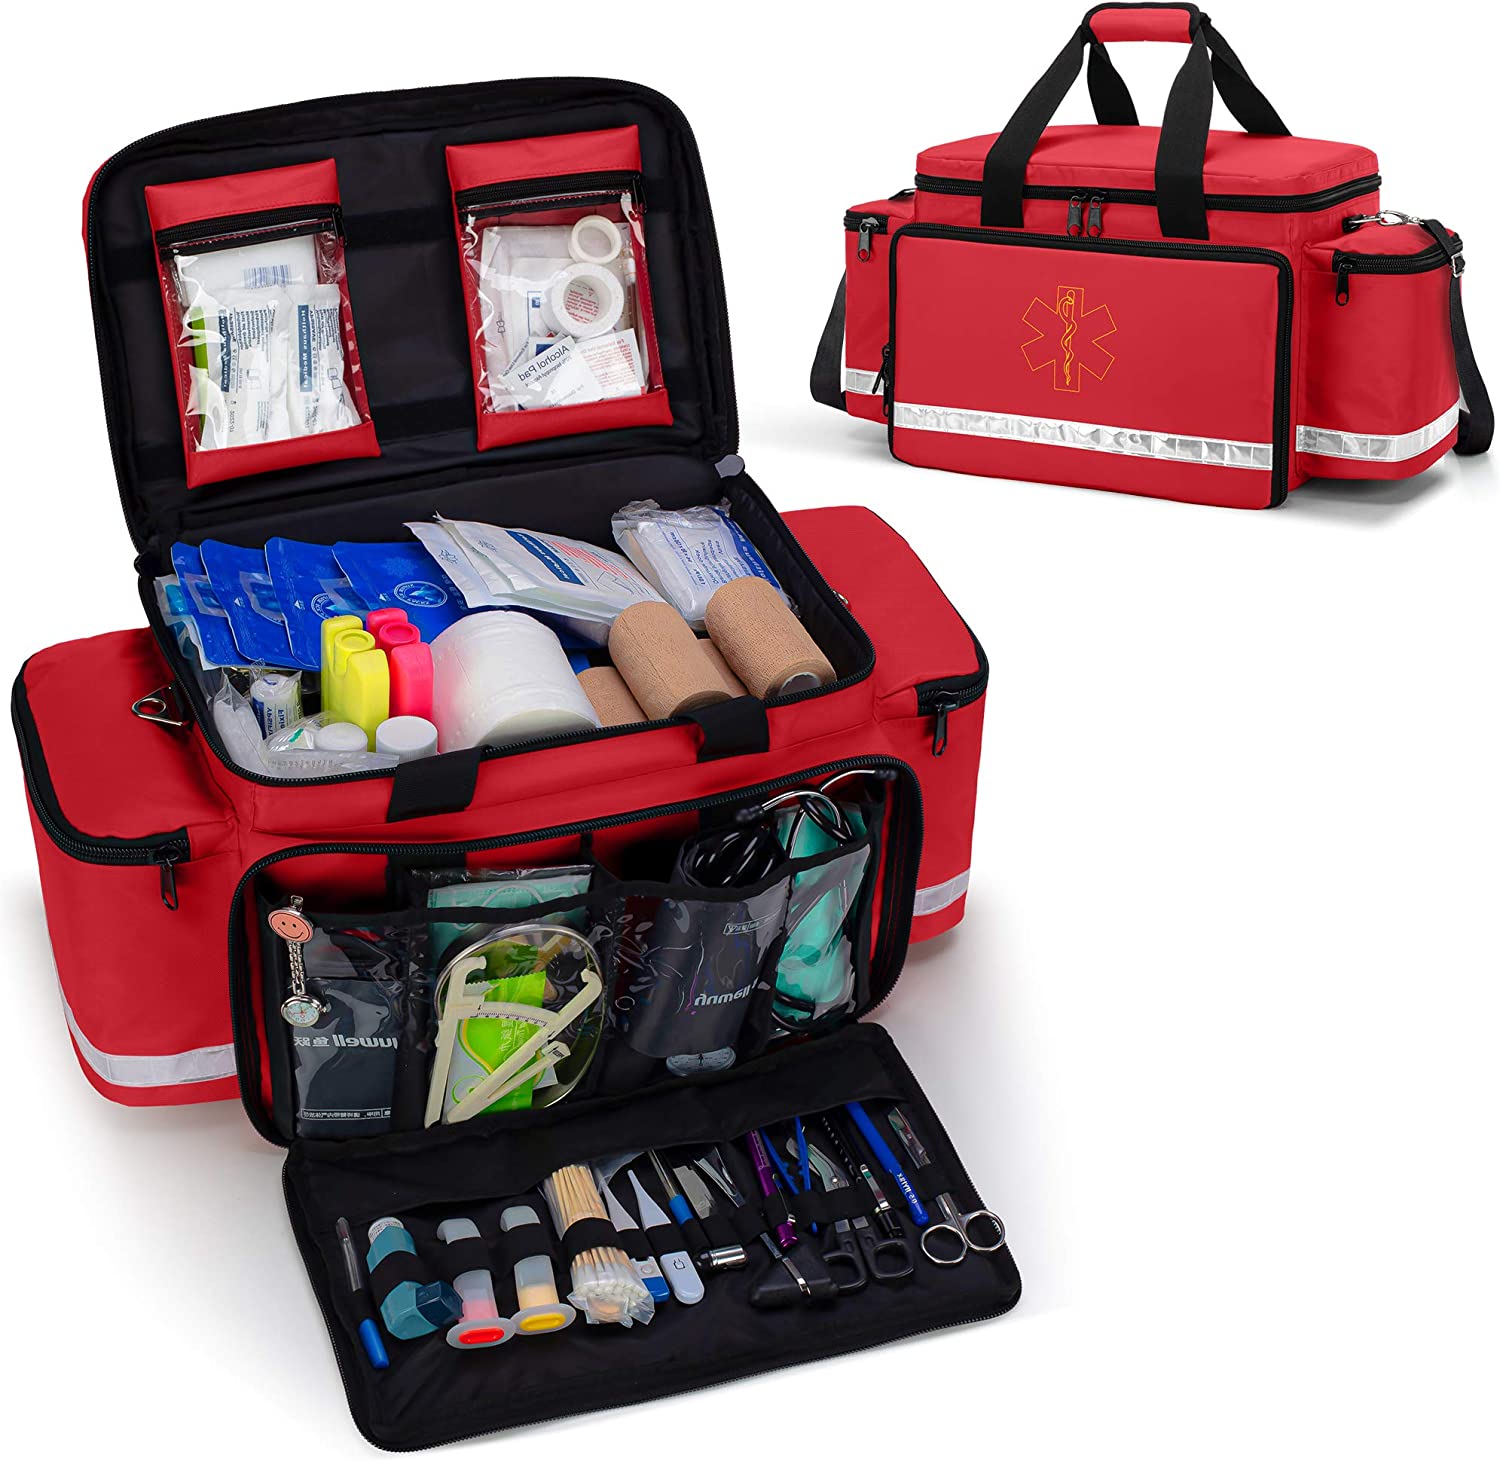 Trunab Emergency Responder Trauma Bag Empty, Professional First Aid Kits Storage Medical Bag with Inner Dividers and Anti-Scratch Bottom, Ideal for EMT, EMS, Paramedics, Red, Bag ONLY